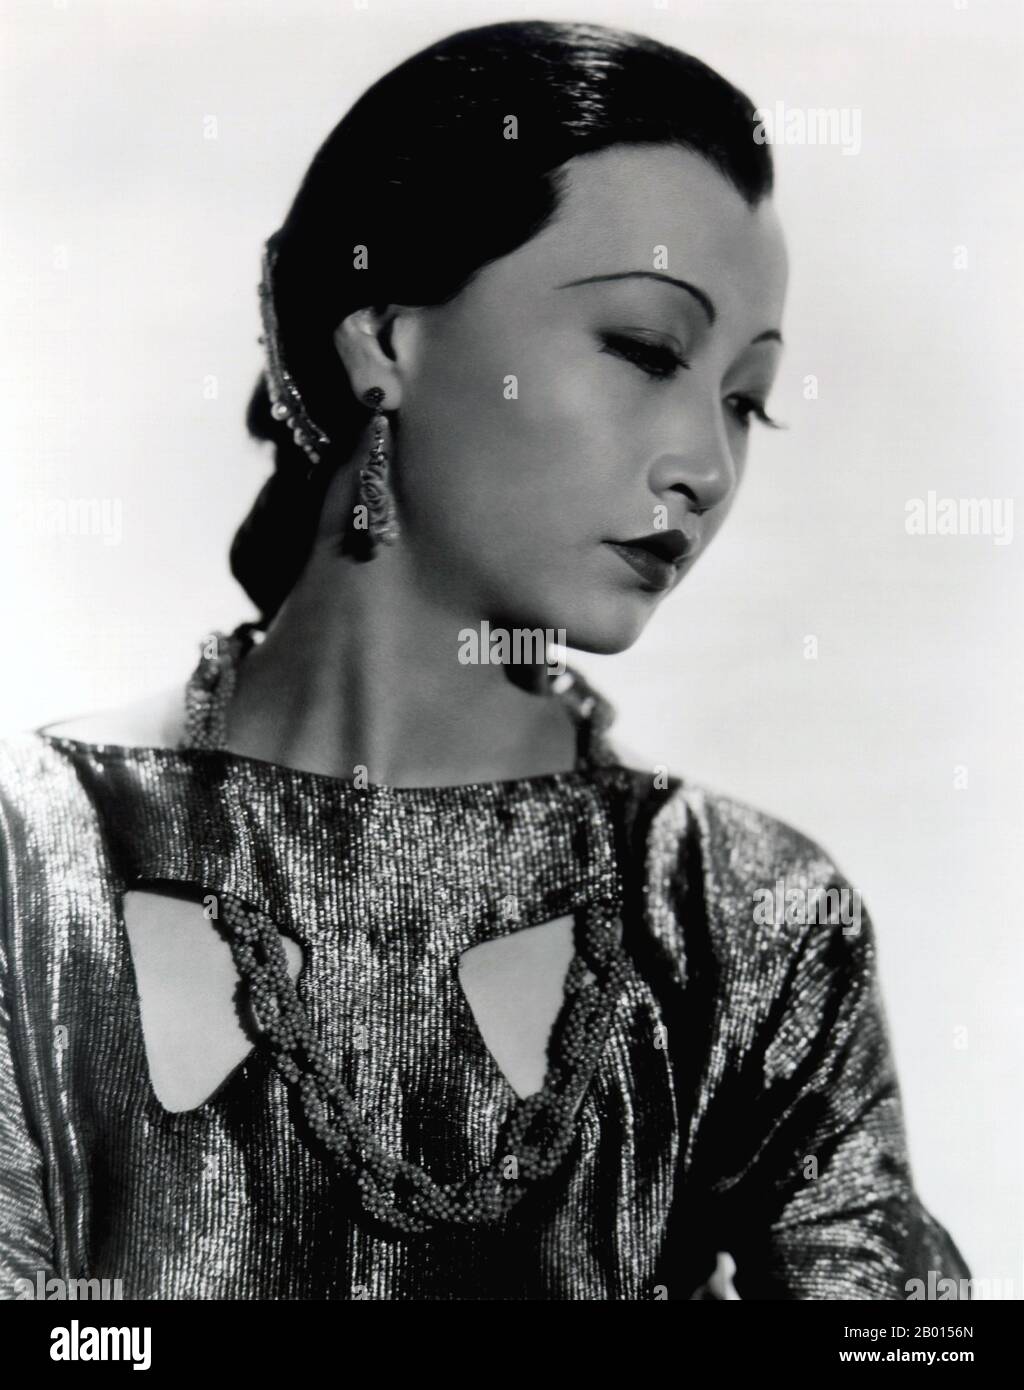 USA: Anna May Wong, Chinese-American movie star (January 3, 1905 – February 3, 1961), c. 1929.  Anna May Wong was an American actress, the first Chinese American movie star, and the first Asian American to become an international star. Her long and varied career spanned both silent and sound film, television, stage, and radio.  Born near the Chinatown neighborhood of Los Angeles to second-generation Chinese-American parents, Wong became infatuated with the movies and began acting in films at an early age. Stock Photo